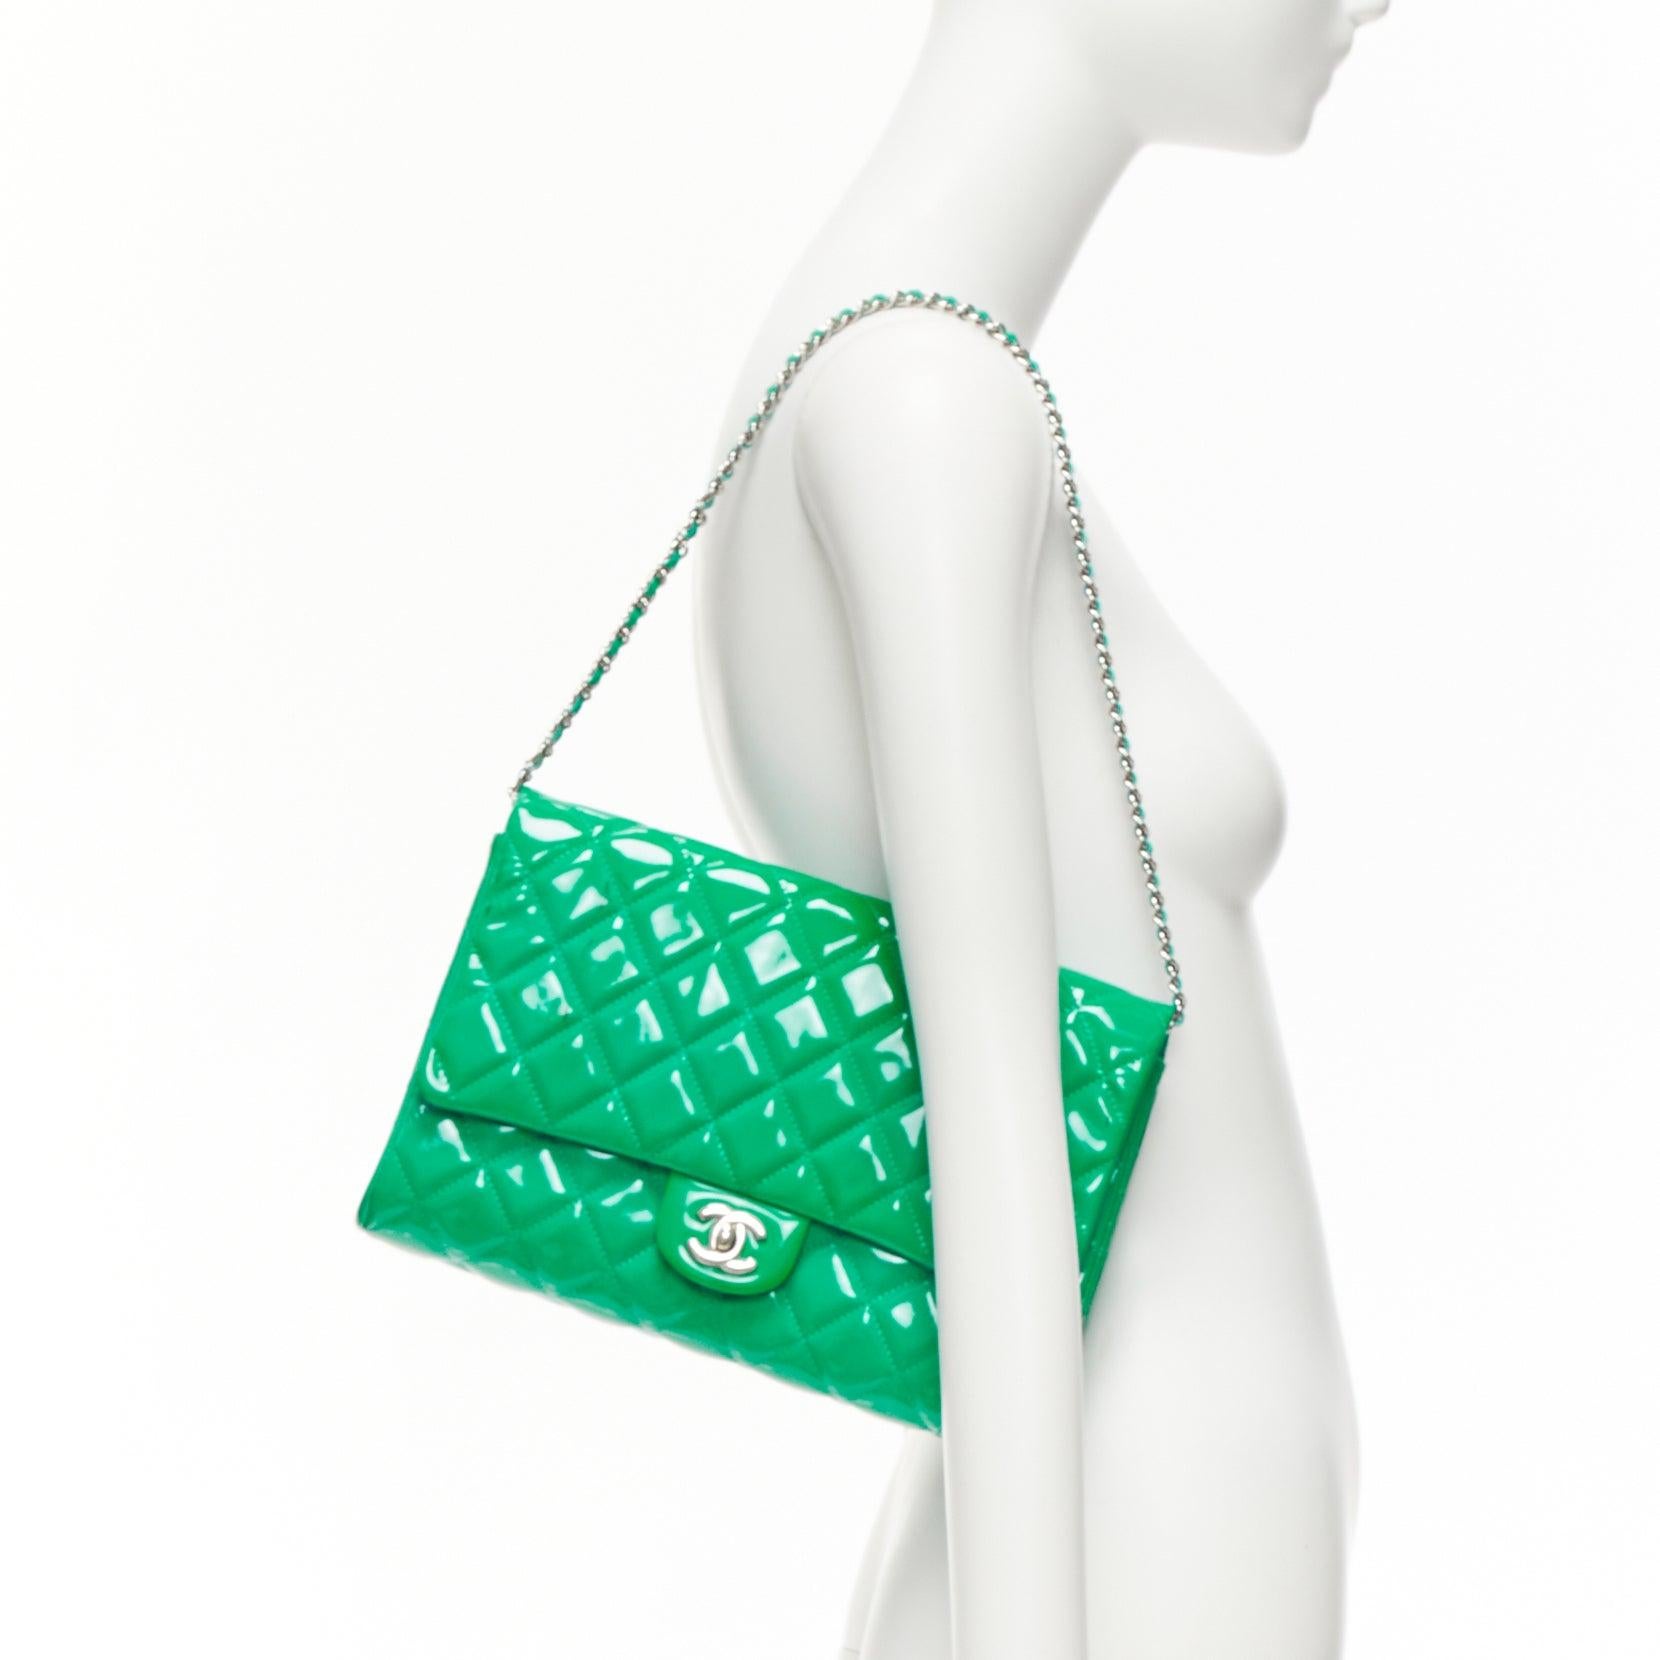 CHANEL green patent leather silver CC logo turnlock flap shoulder bag
Reference: AAWC/A01002
Brand: Chanel
Designer: Karl Lagerfeld
Material: Patent Leather
Color: Green
Pattern: Solid
Closure: Turnlock
Lining: Green Leather
Extra Details: The